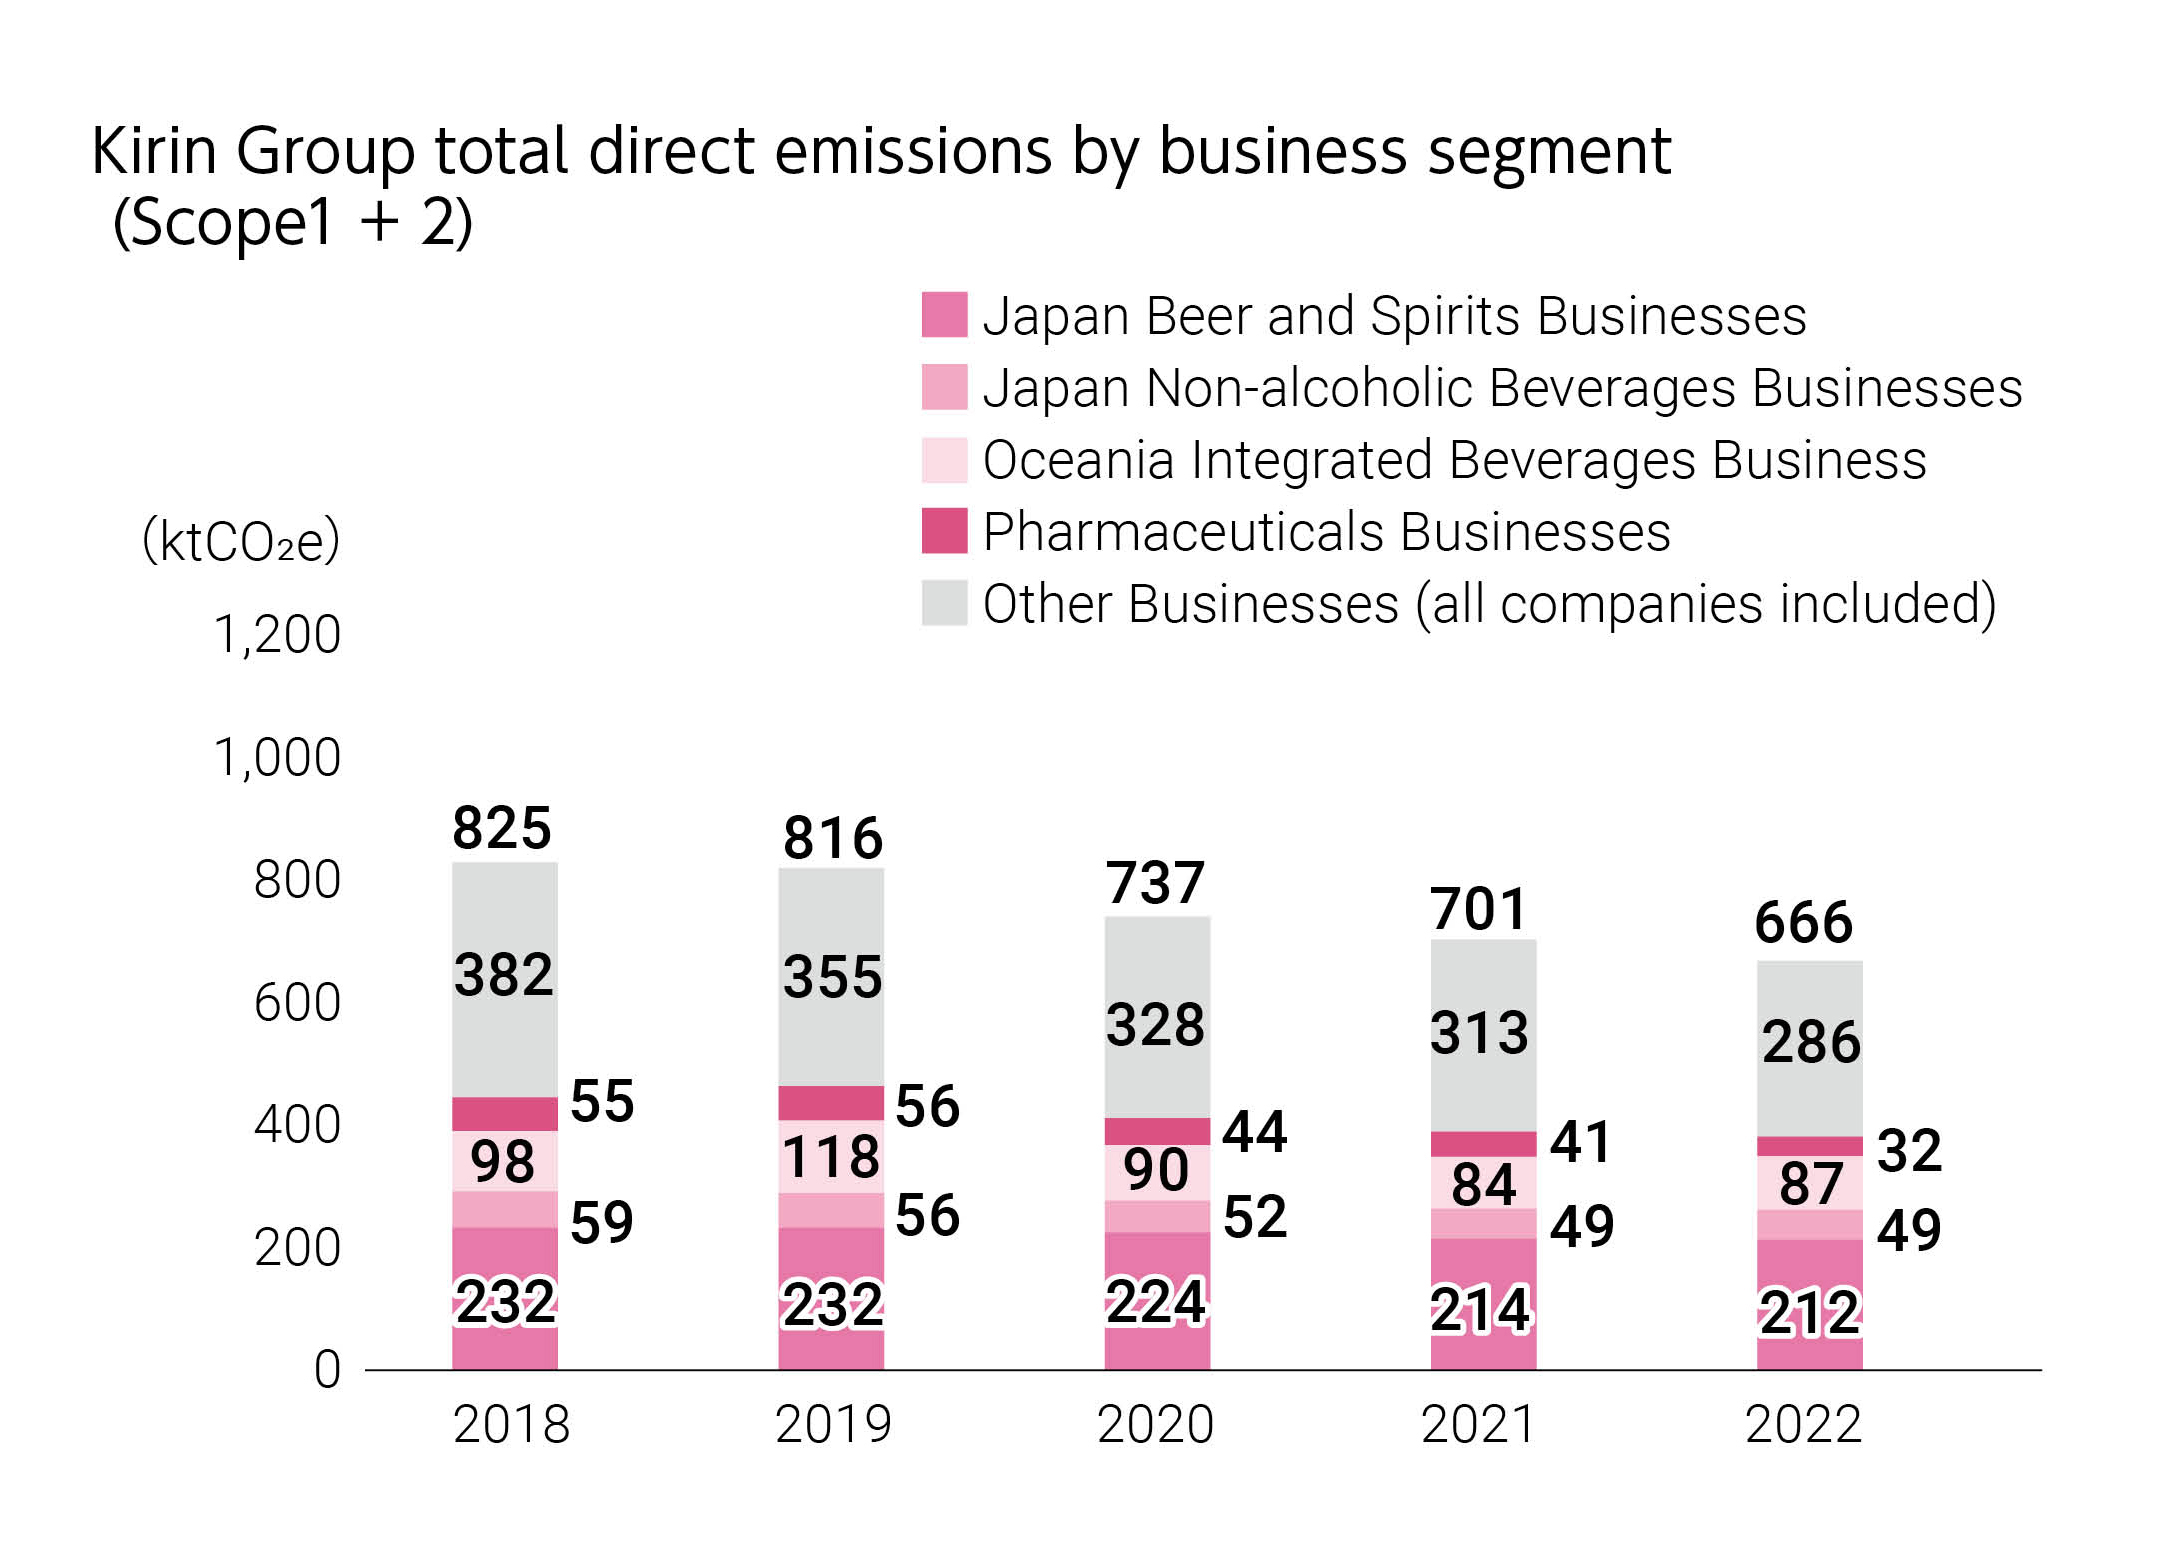 Kirin Group total direct emissions by business segment (Scope1 + 2)